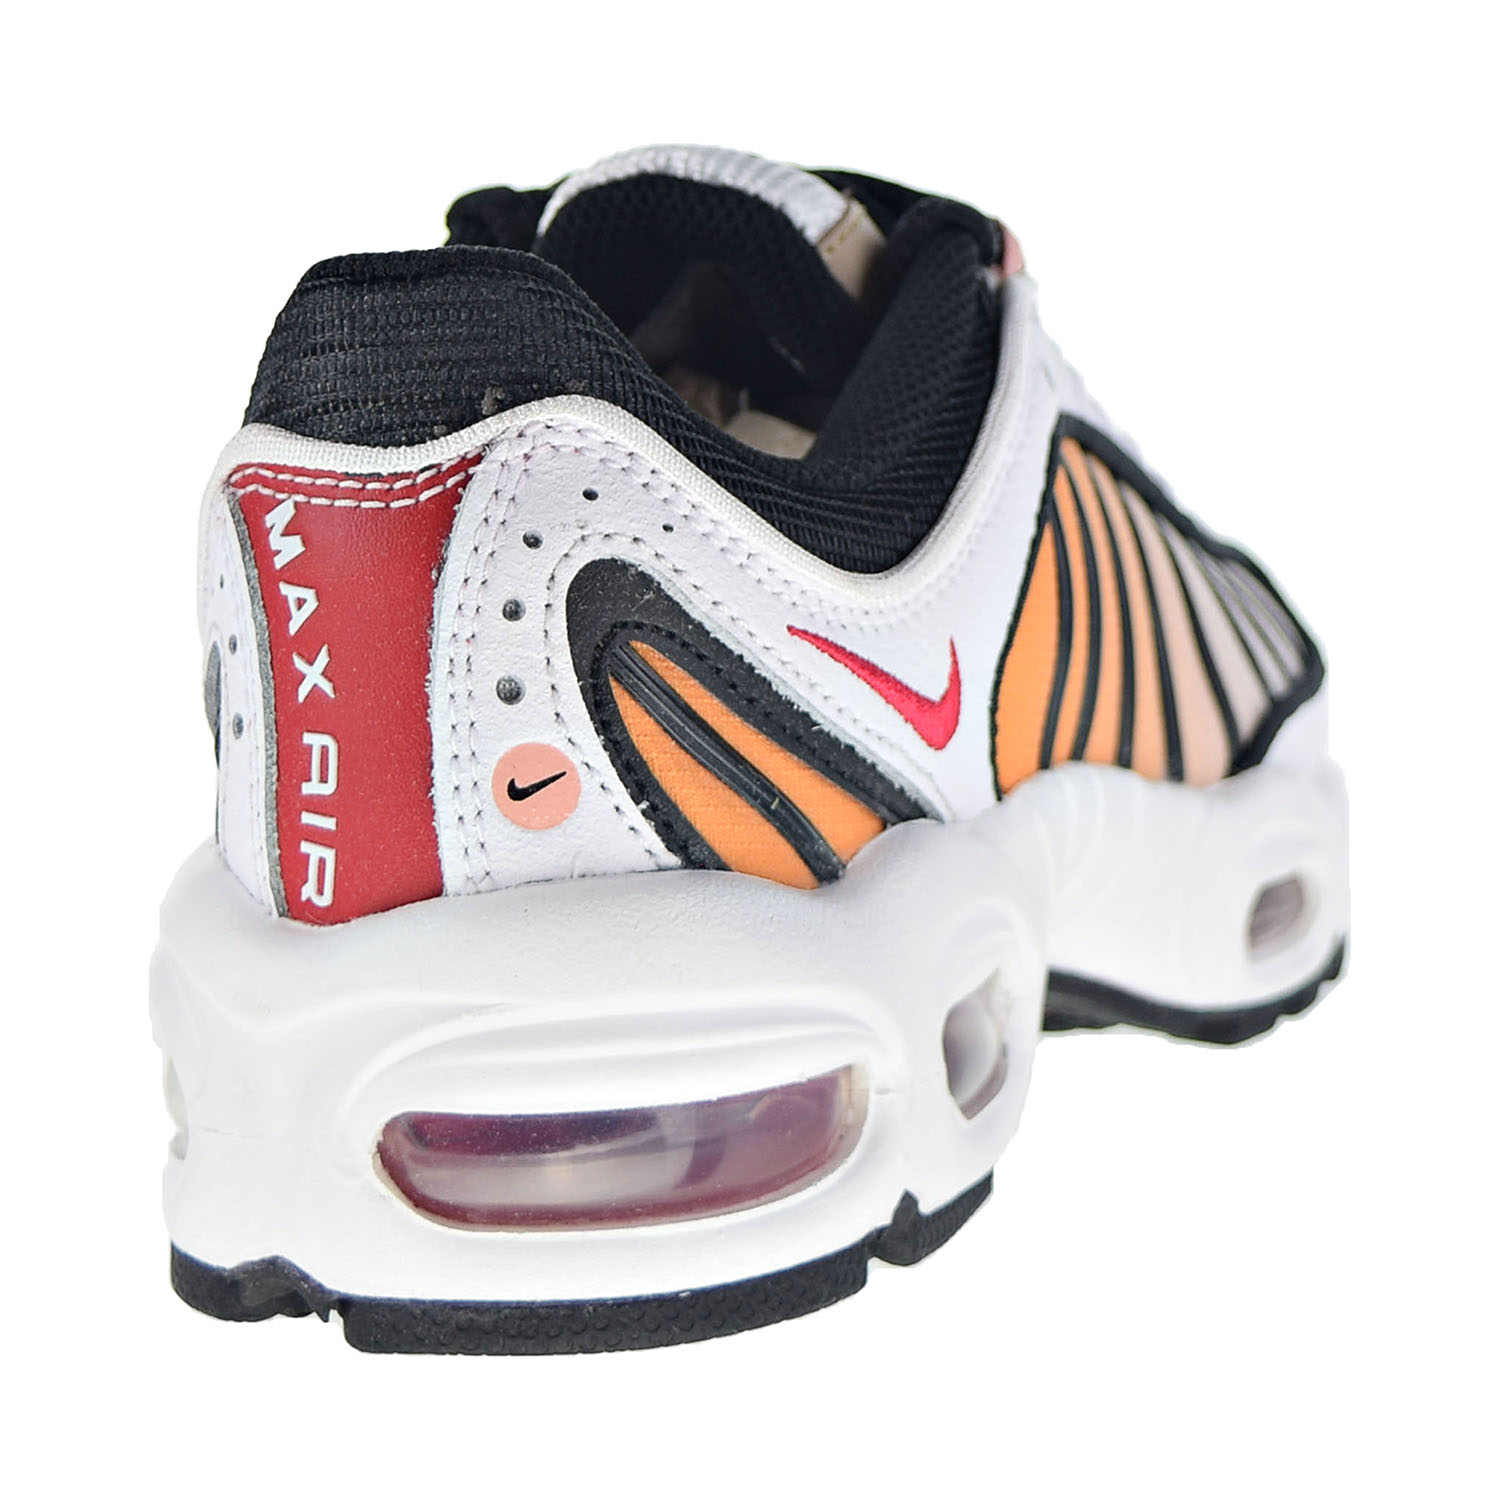 Nike Air Max Tailwind 4 Women's Shoes White-Black-Coral Stardust-Gym Red cj7976-100 - image 3 of 6